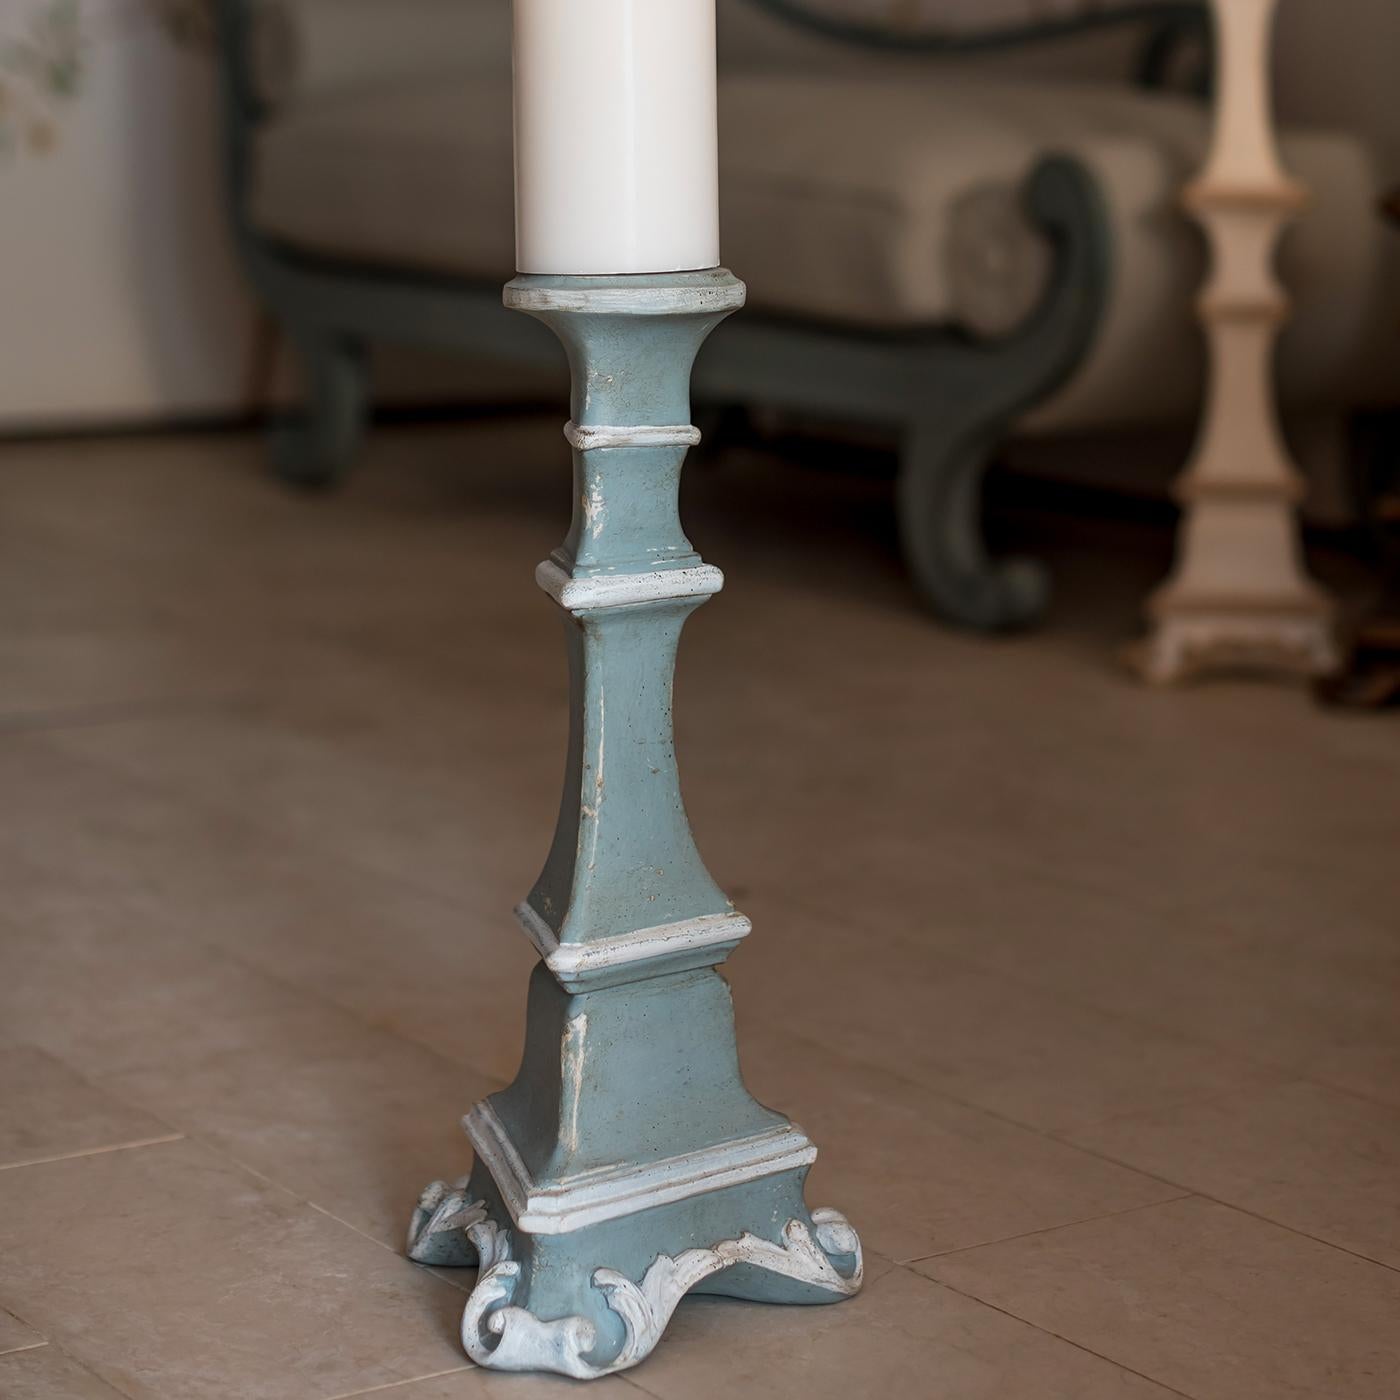 This candle holder is an entirely handcrafted, which is why it is possible for the customer to personalize its size, decorations and colors, in order to perfectly coordinate it with the rest of the dÃ©cor. The candle holder is of high-quality